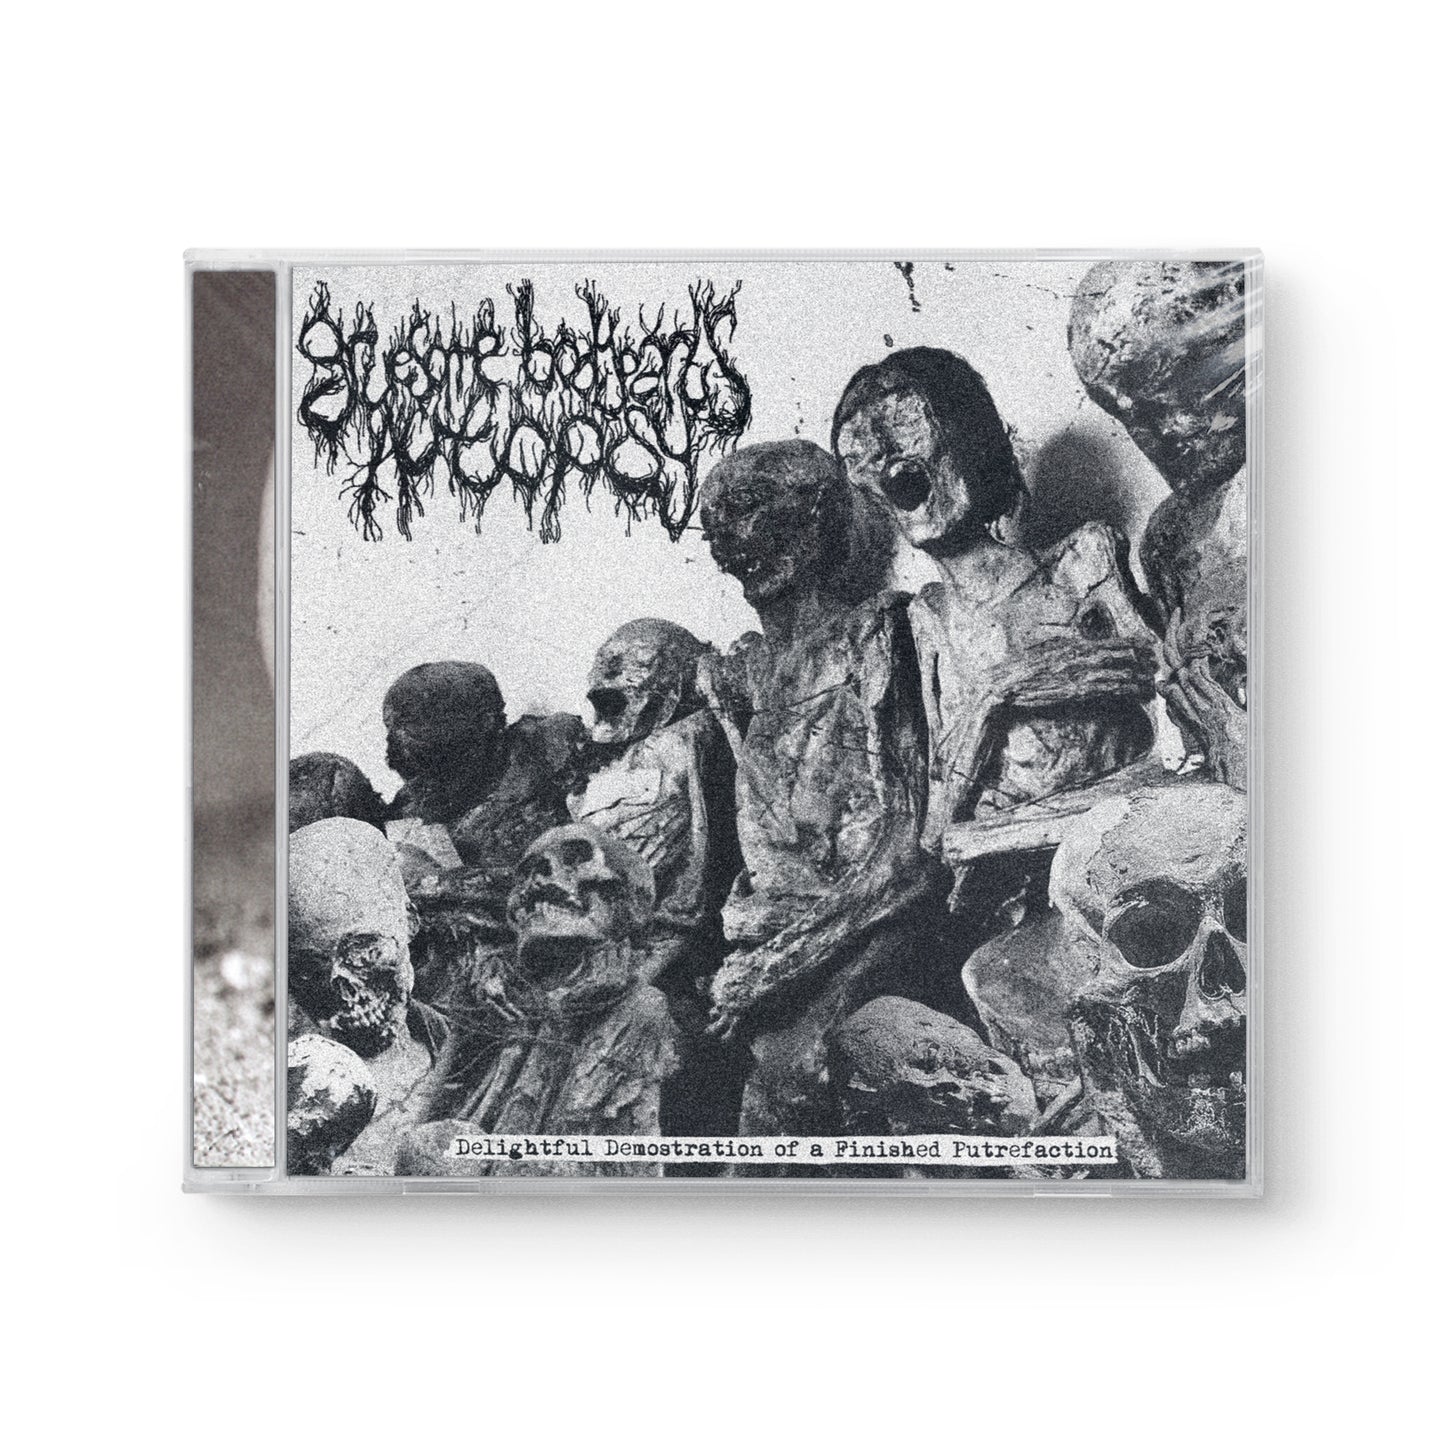 Gruesome Bodyparts Autopsy "Delightful Demonstration Of A Finished Putrefaction" CD